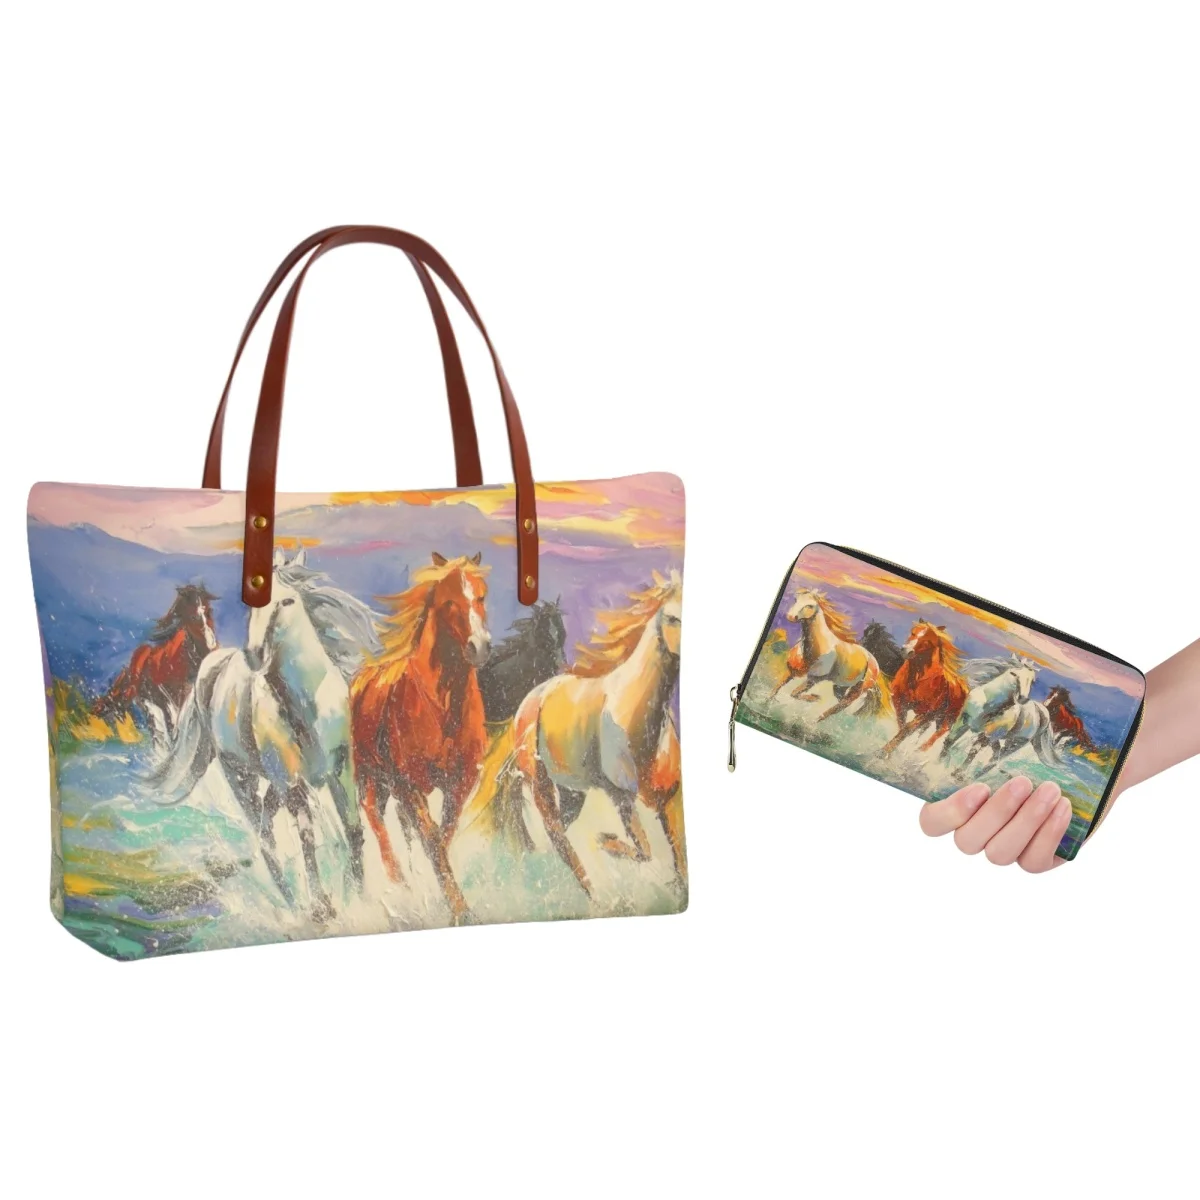 

FORUDESIGNS Galloping Horse Wallet Handbag Female Oil Painting Color Horses Group Design Combination Bag Shopping Travel Bags